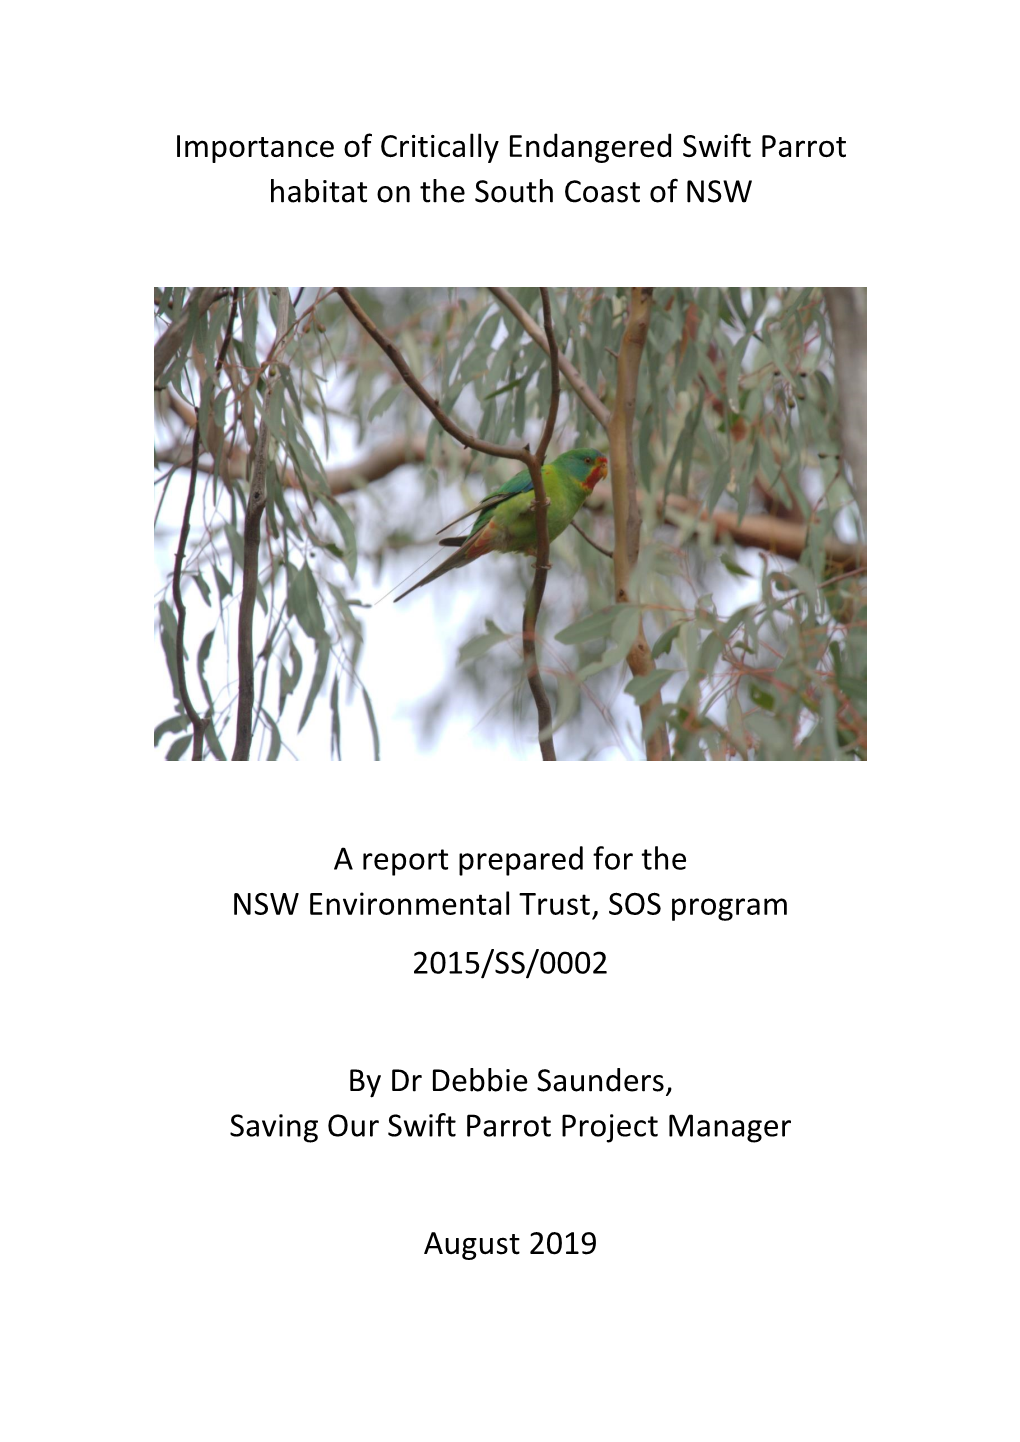 Importance of Critically Endangered Swift Parrot Habitat on the South Coast of NSW